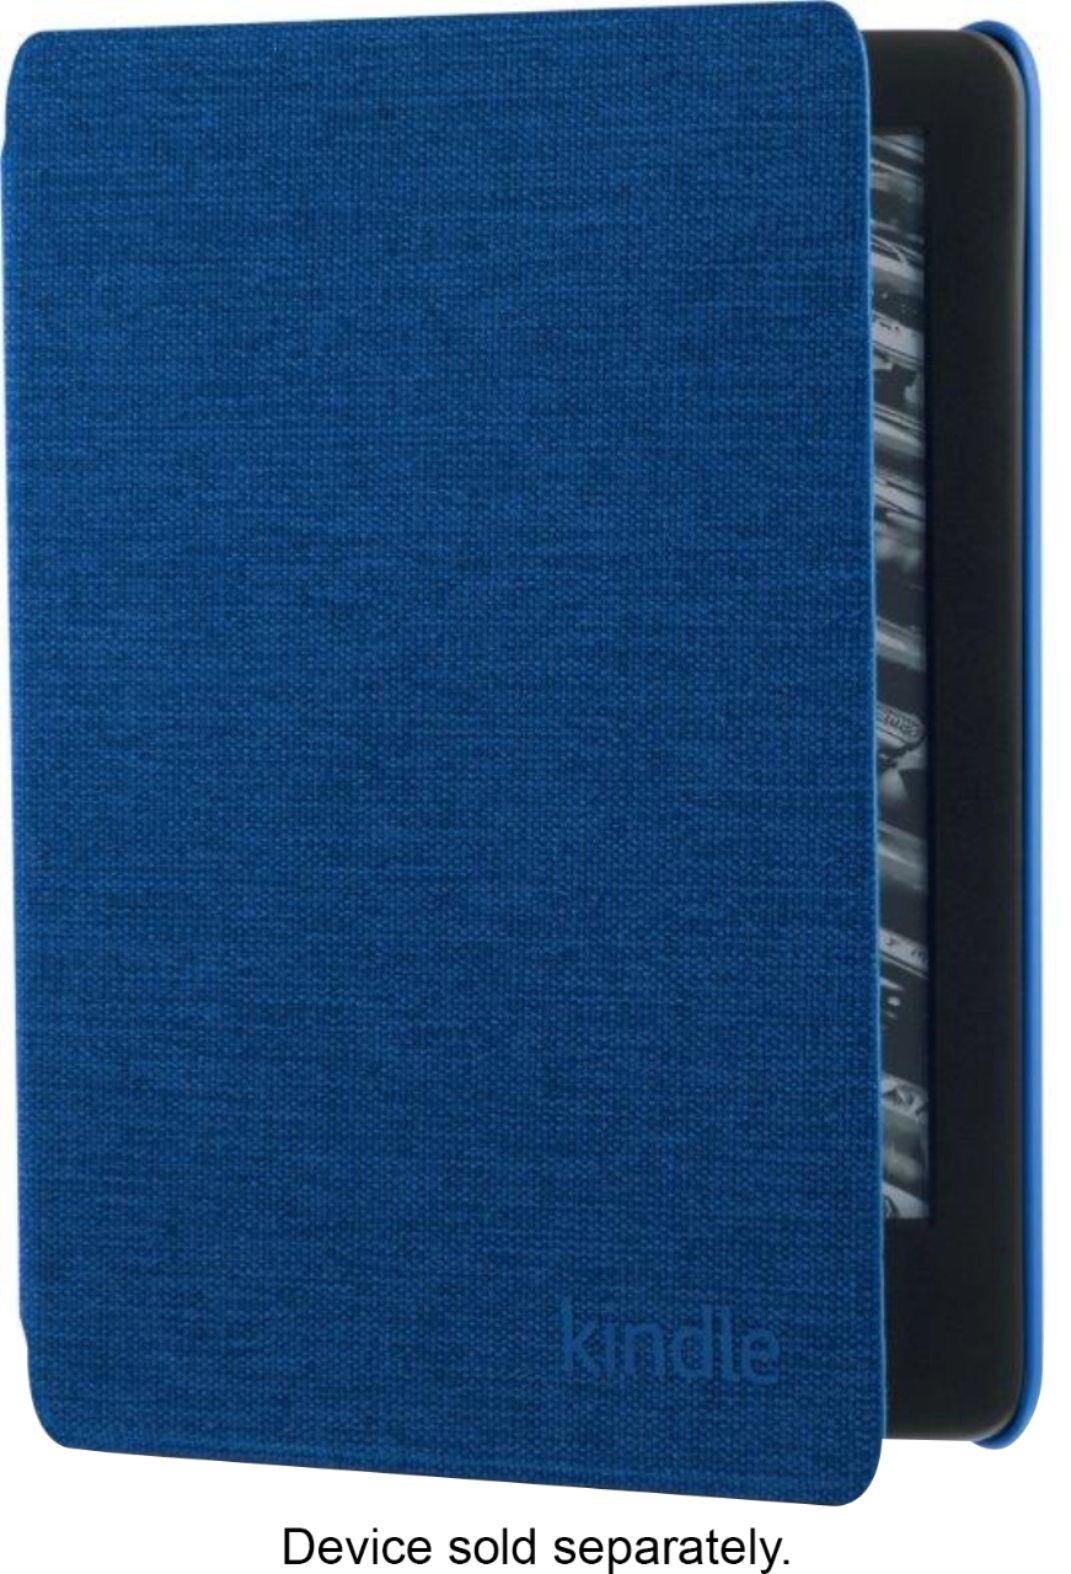 Questions and Answers: Amazon Kindle Fabric Cover Cobalt Blue ...